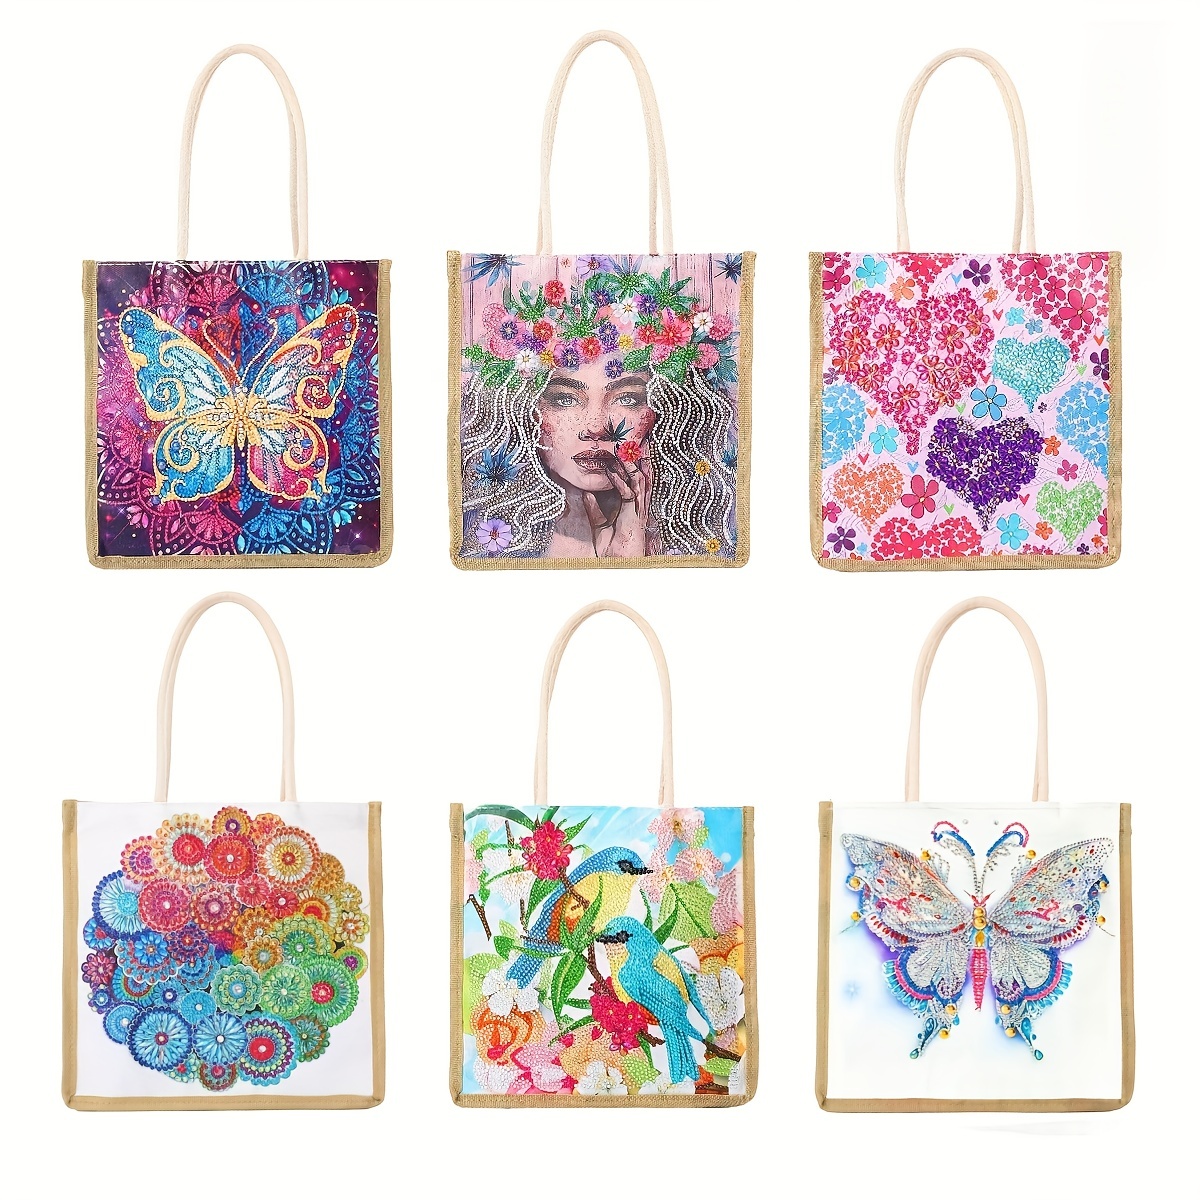 TAIAOJING Girls Cotton Canvas Tote Bag With Diamonds 5D DIY Diamond Painting  Reusable Grocery Bags For Durable Fashionable Bags 